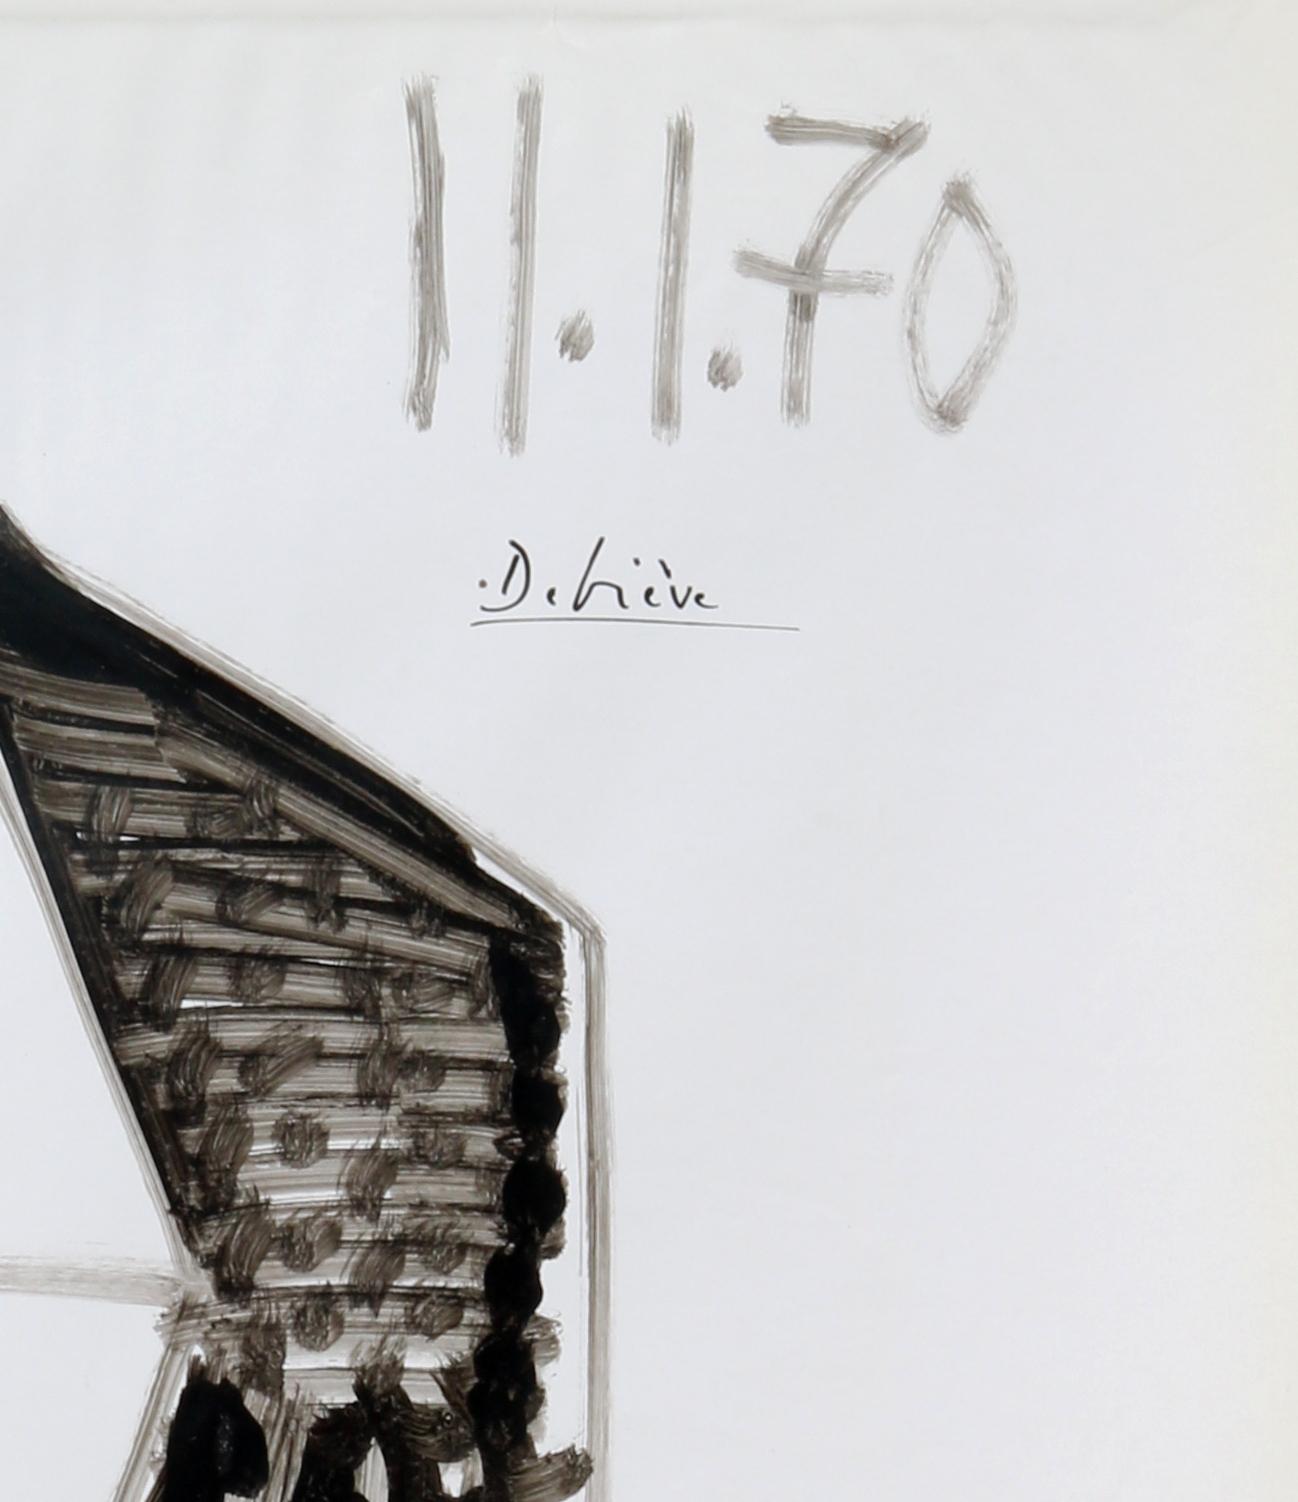 Fishnet stocking (I), R. Debiève, unique piece, Indian ink on paper - Painting by Raymond Debieve